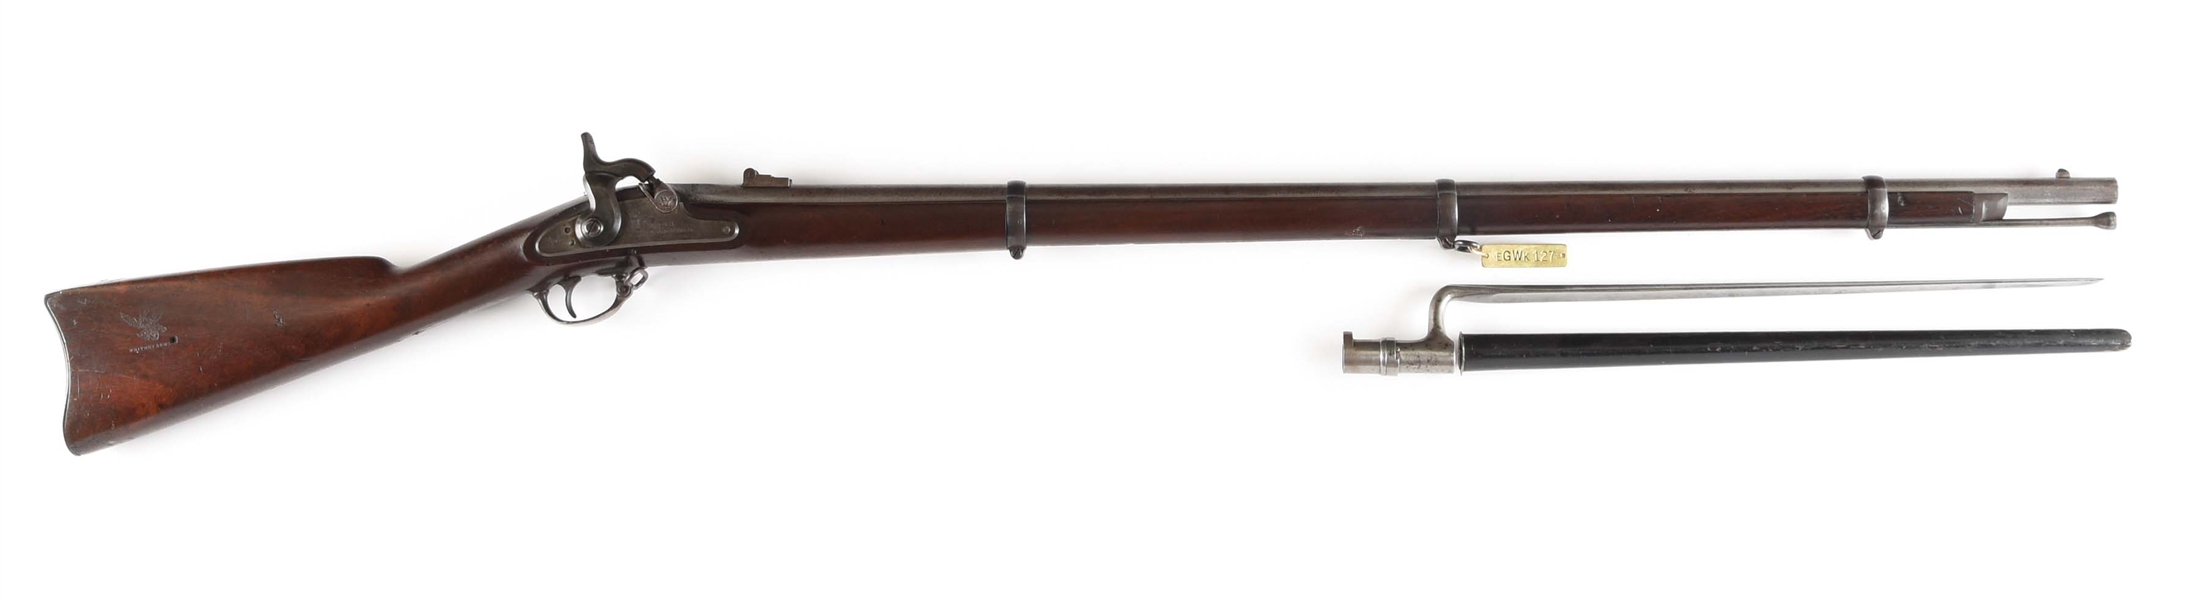 (A) POST CIVIL WAR WHITNEY ASSEMBLED SPRINGFIELD MODEL 1863 TYPE 1 RIFLED MUSKET.